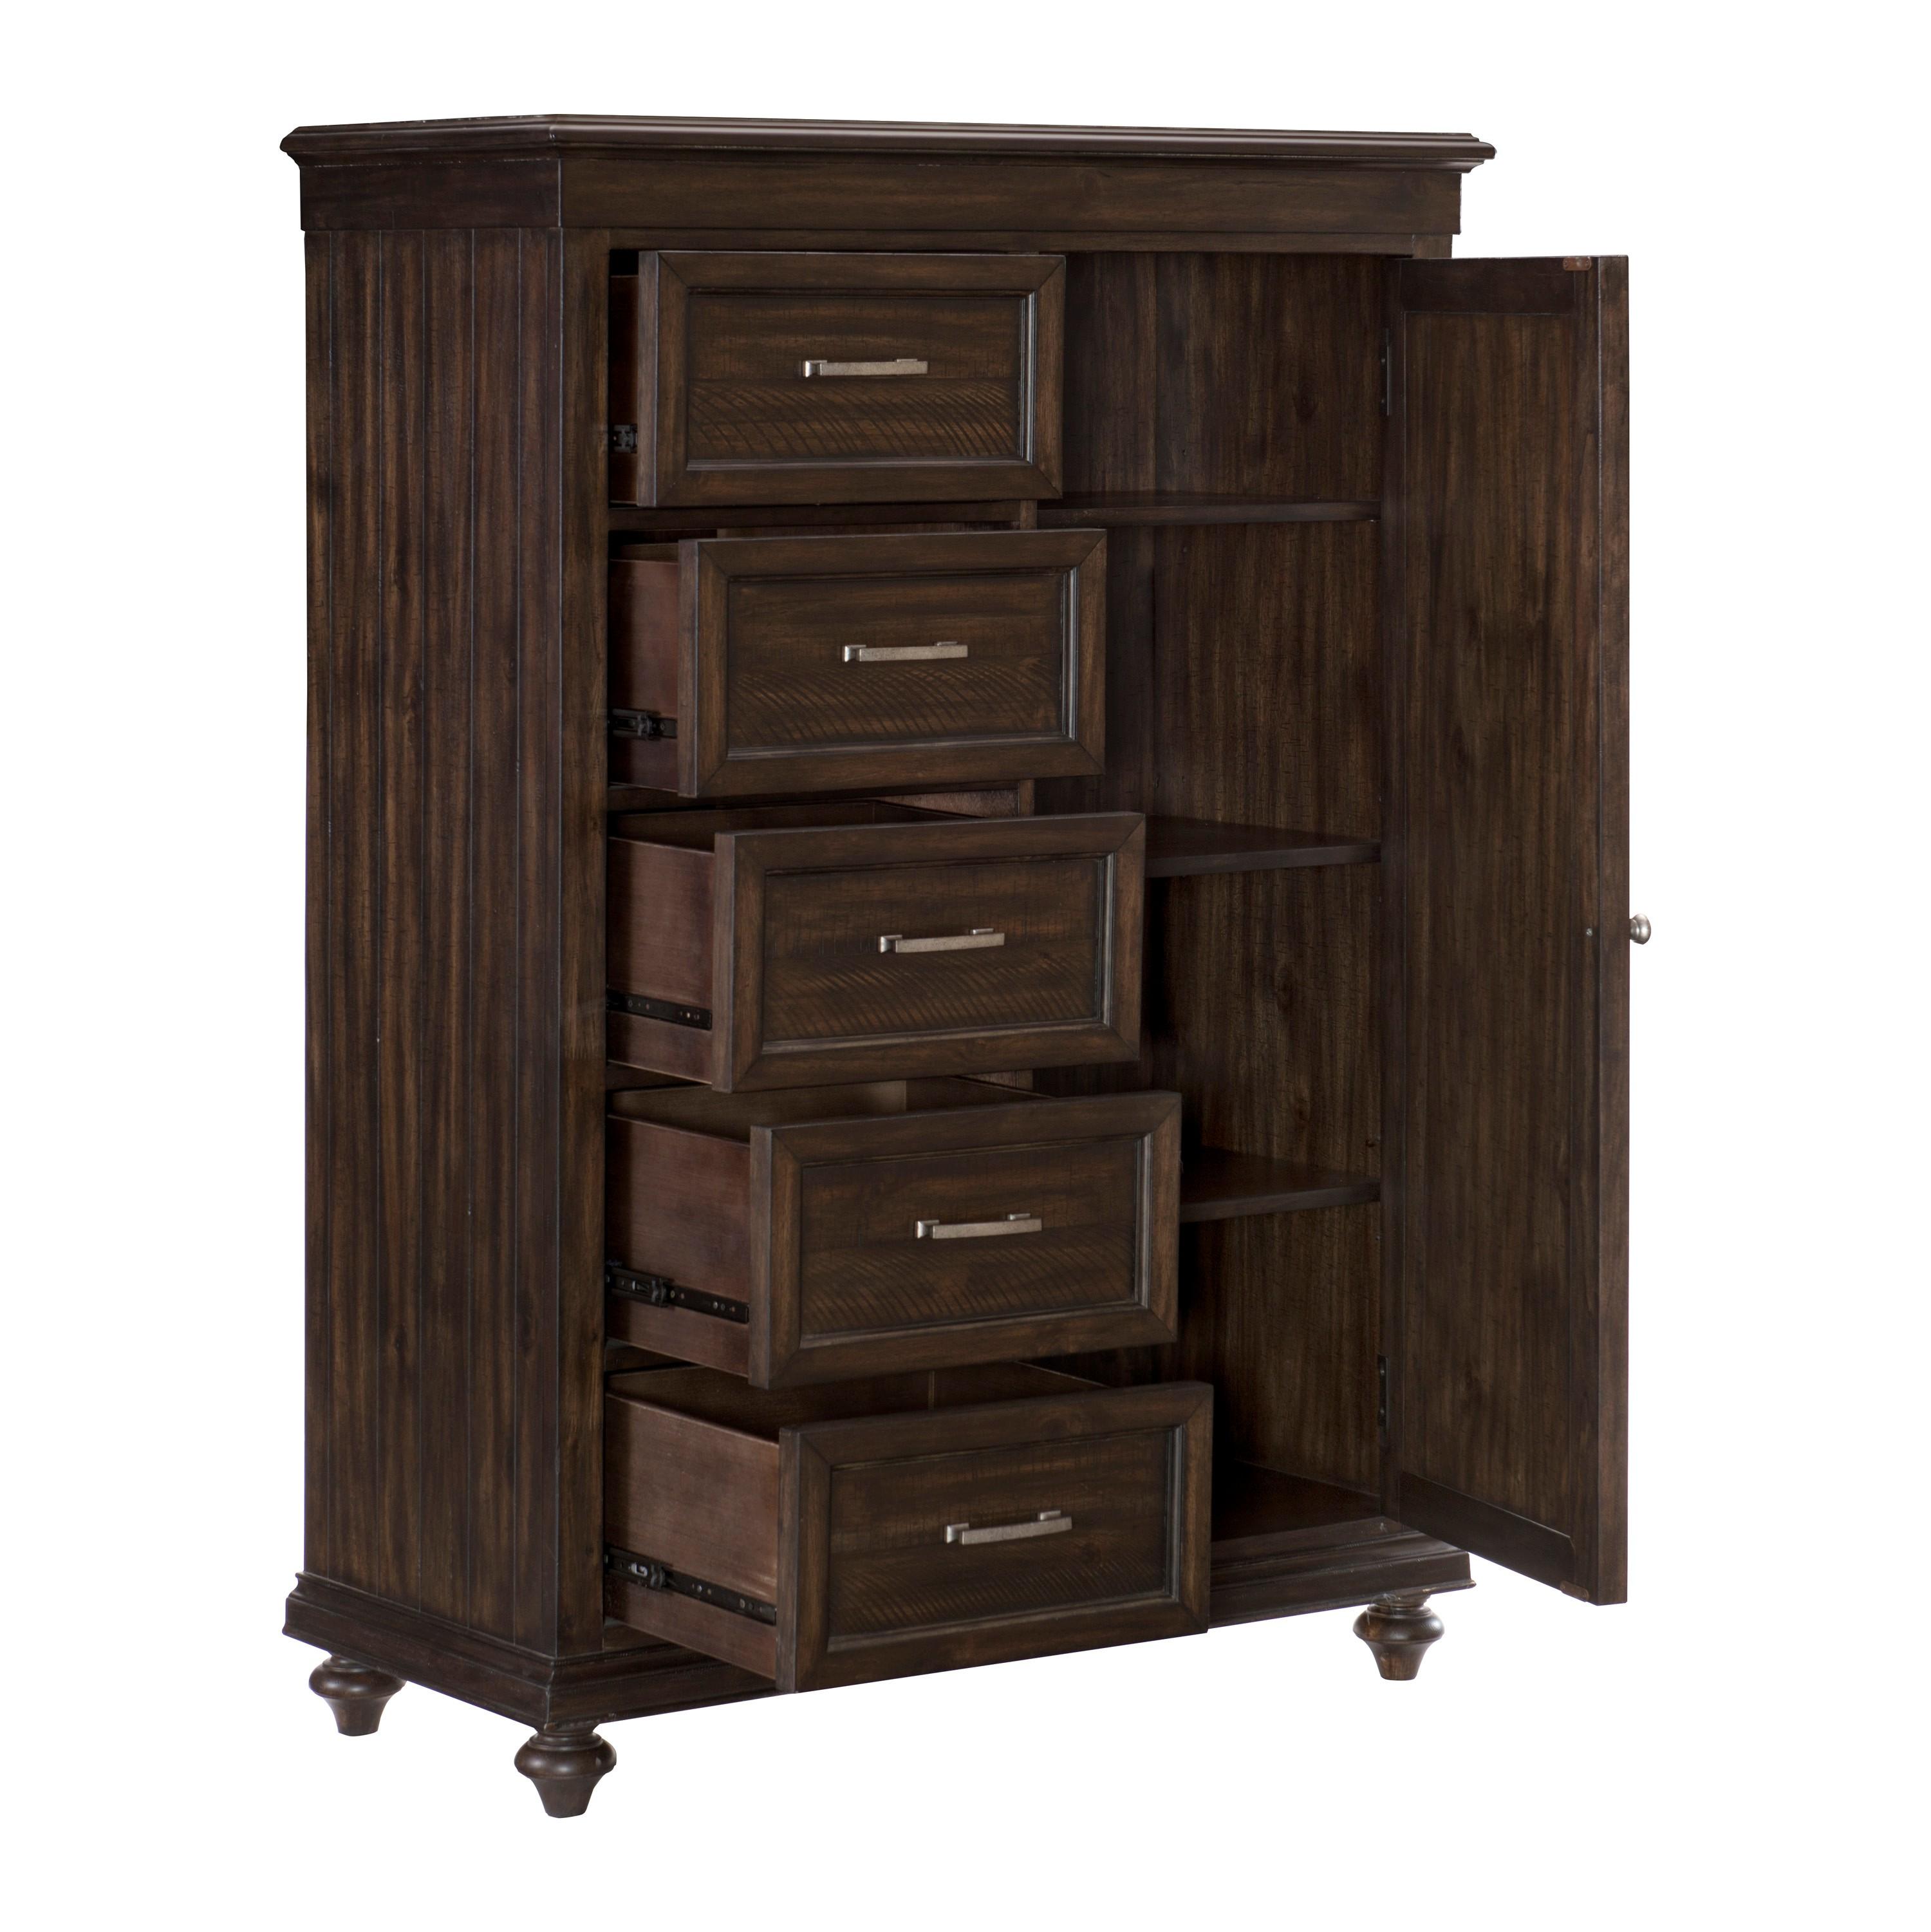 

    
Transitional Driftwood Charcoal Wood Wardrobe Chest Homelegance 1689-10 Cardano
